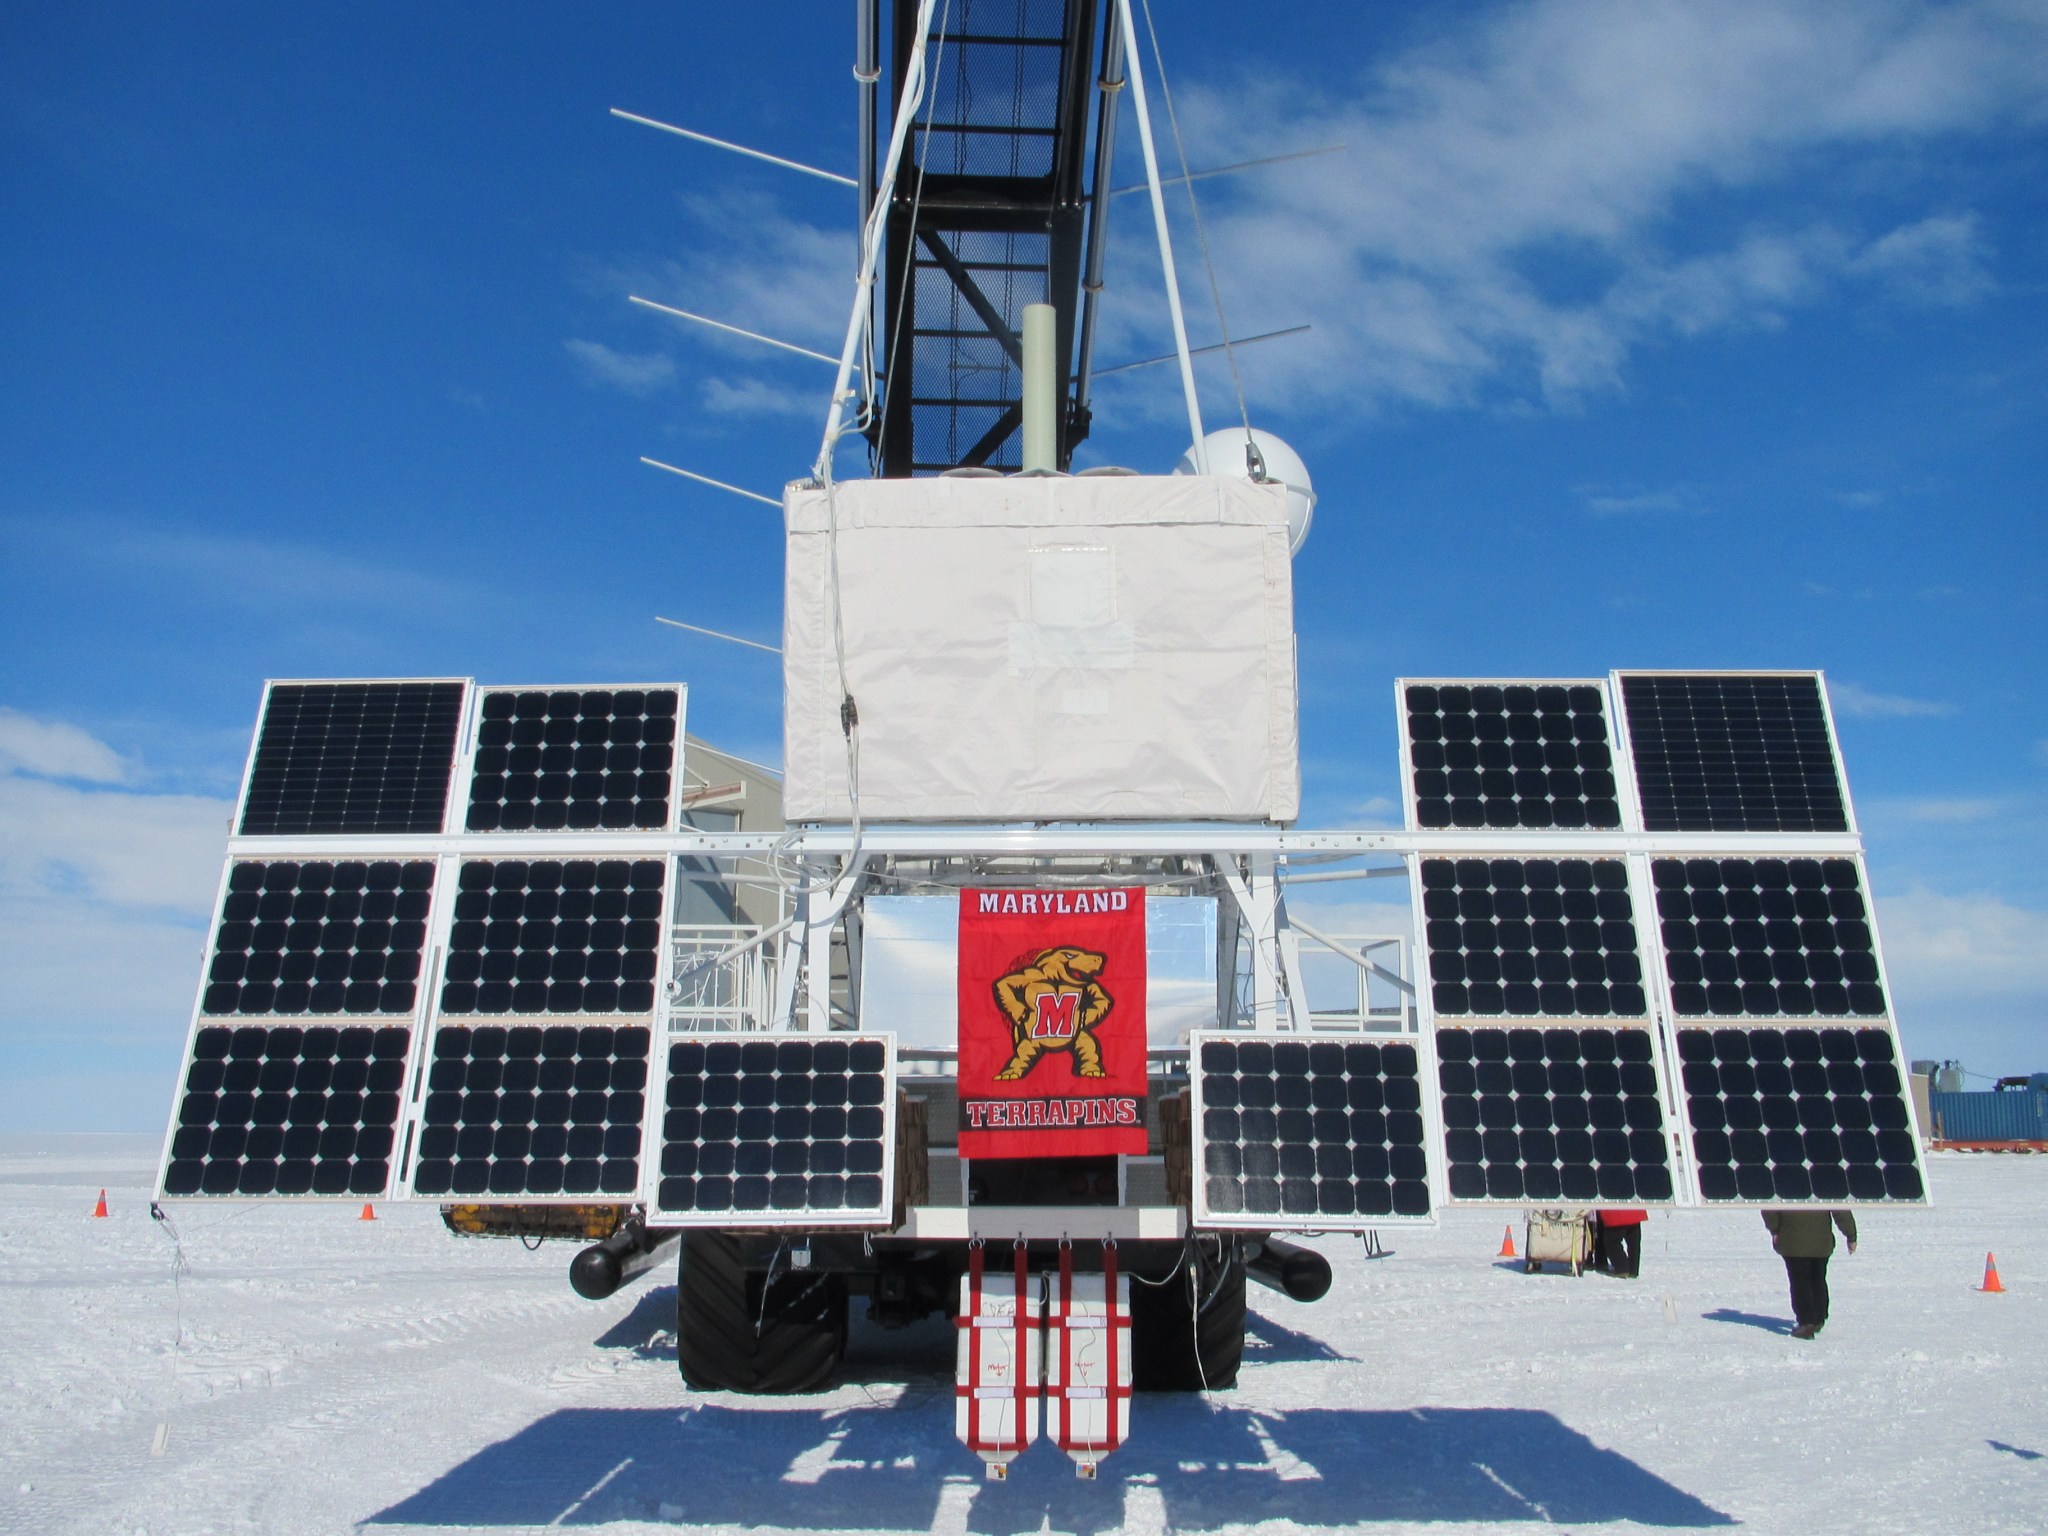 ISS-CREAM, a rectangular white box, hangs from a crane attached to multiple solar panels in a snowy landscape.